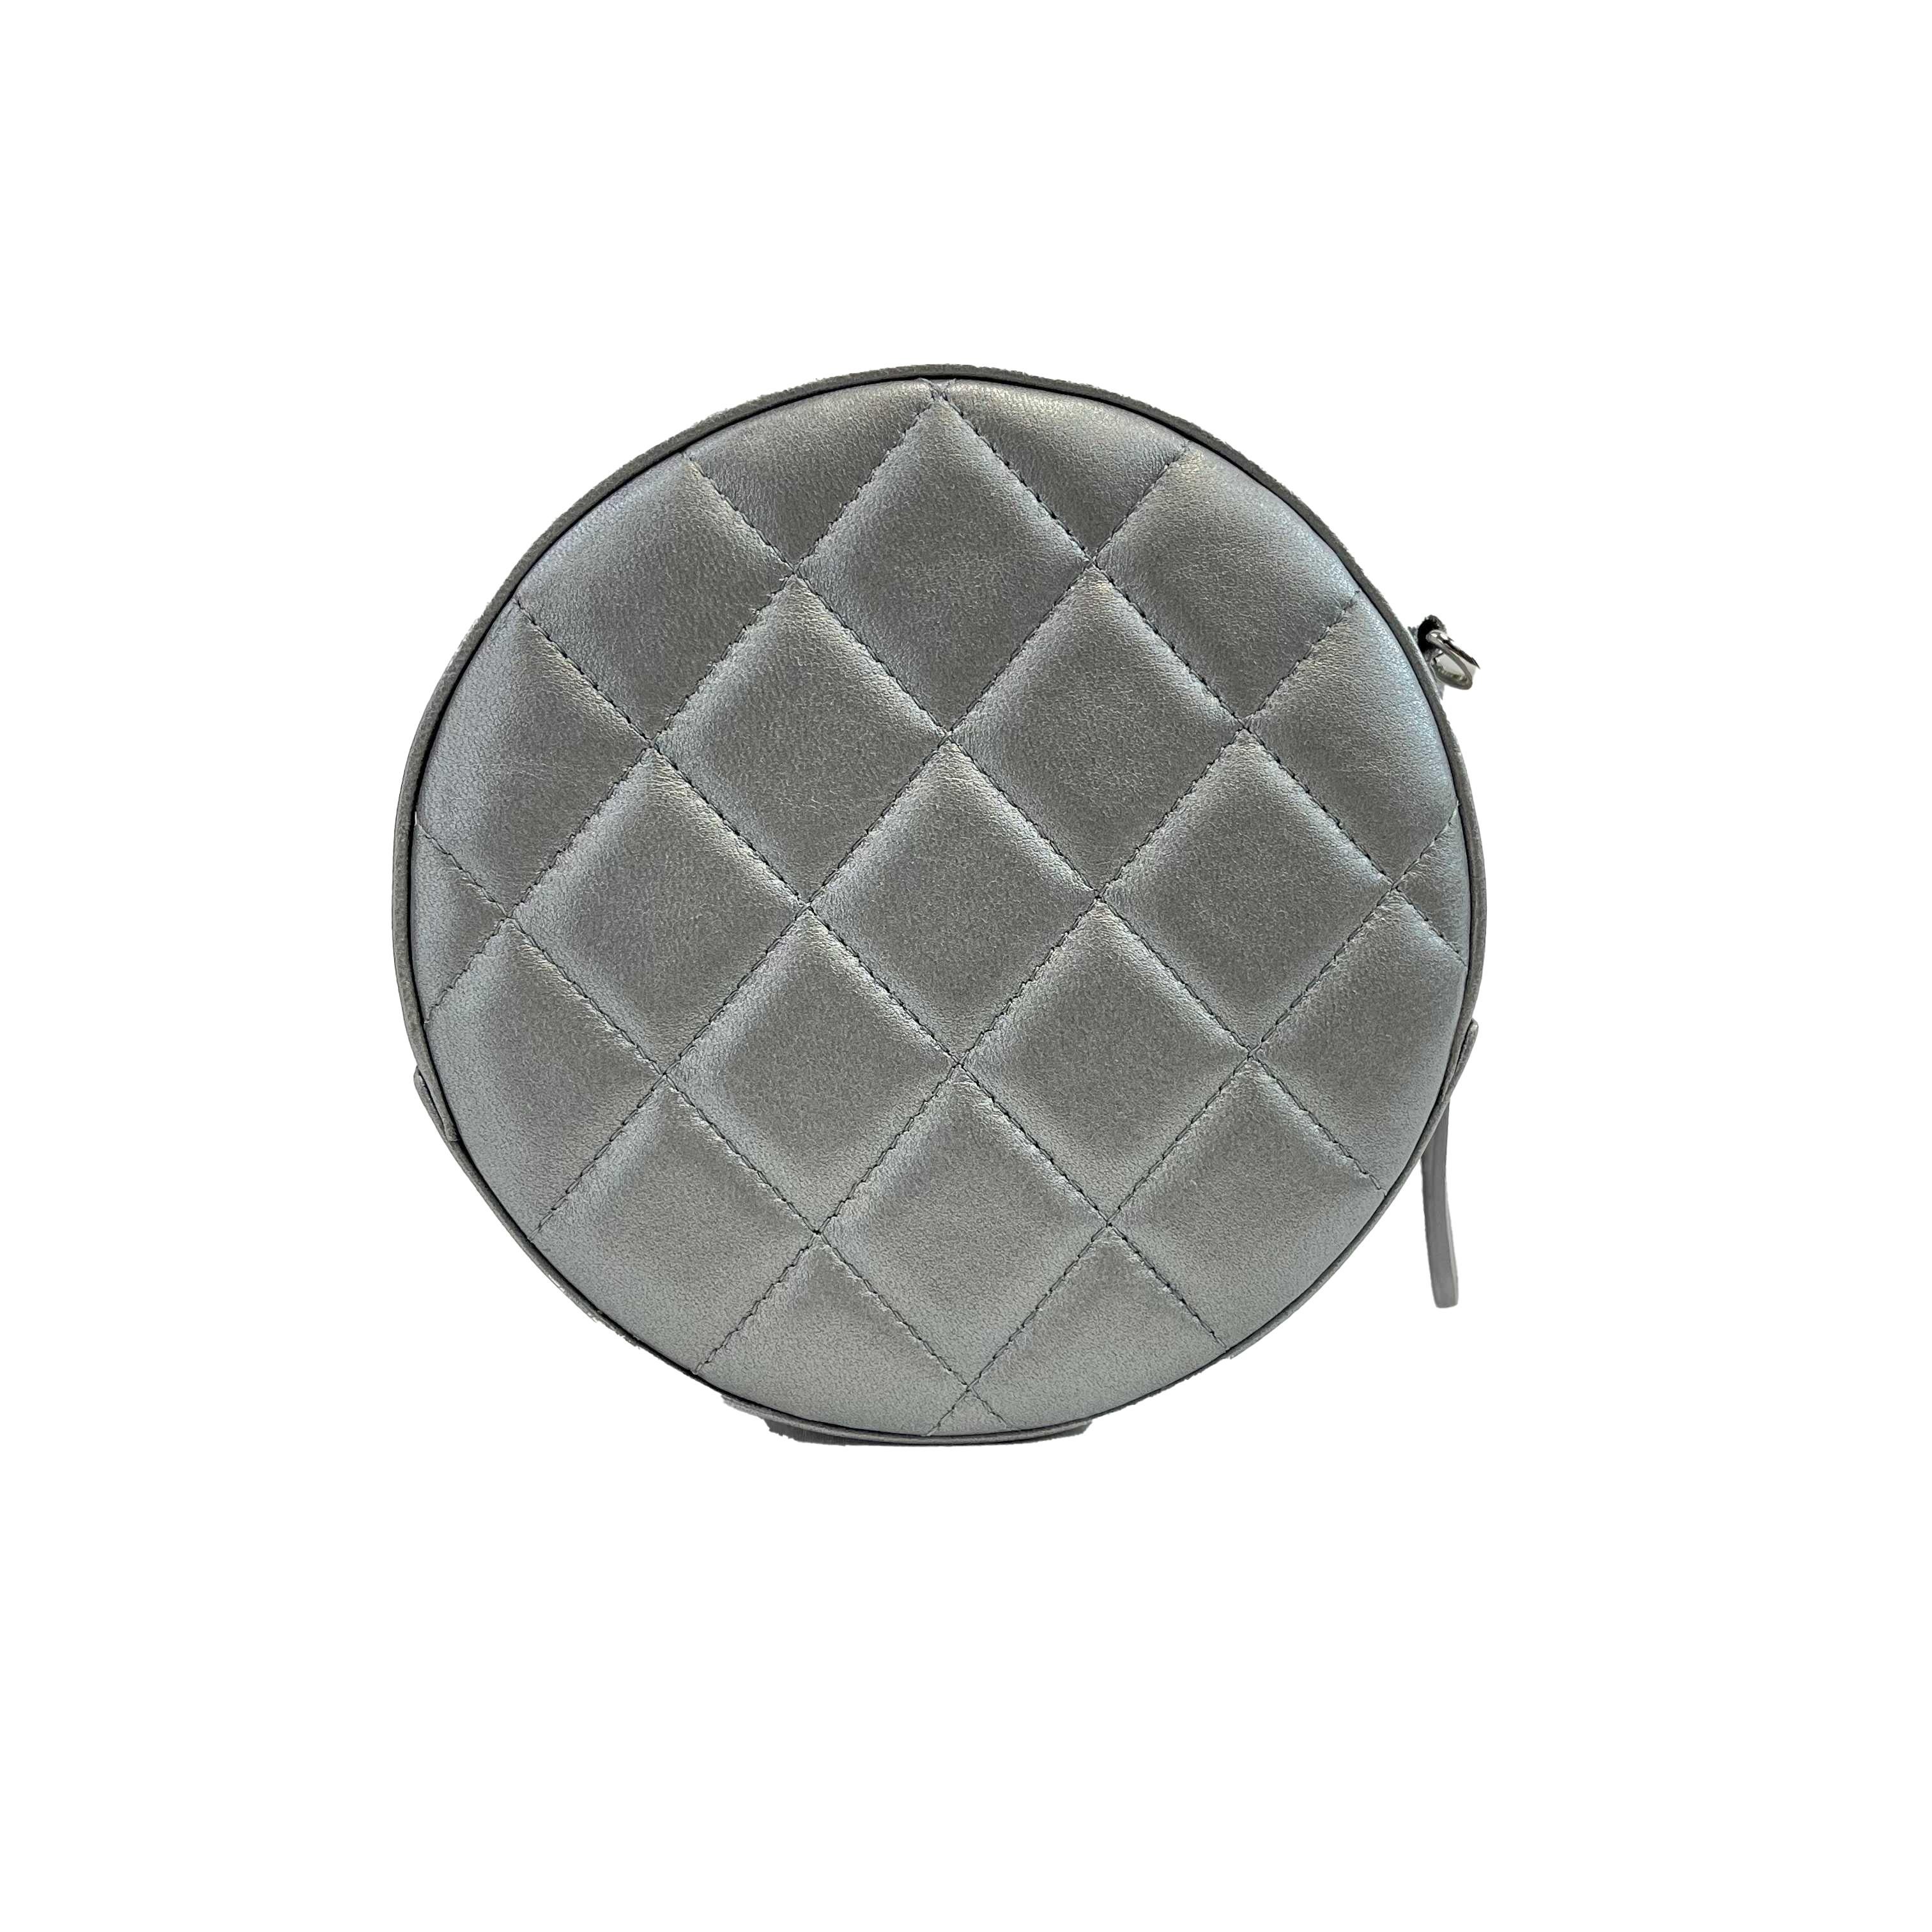 CHANEL - CC Sequined / Leather Round - Gray / Pink Mini Crossbody

Description

* Silver leather
* Quilted back
* Sequined design on front
* Silver hardware
* Silver interlocking CC on front
* Top zipper closure
* Silver chain and leather